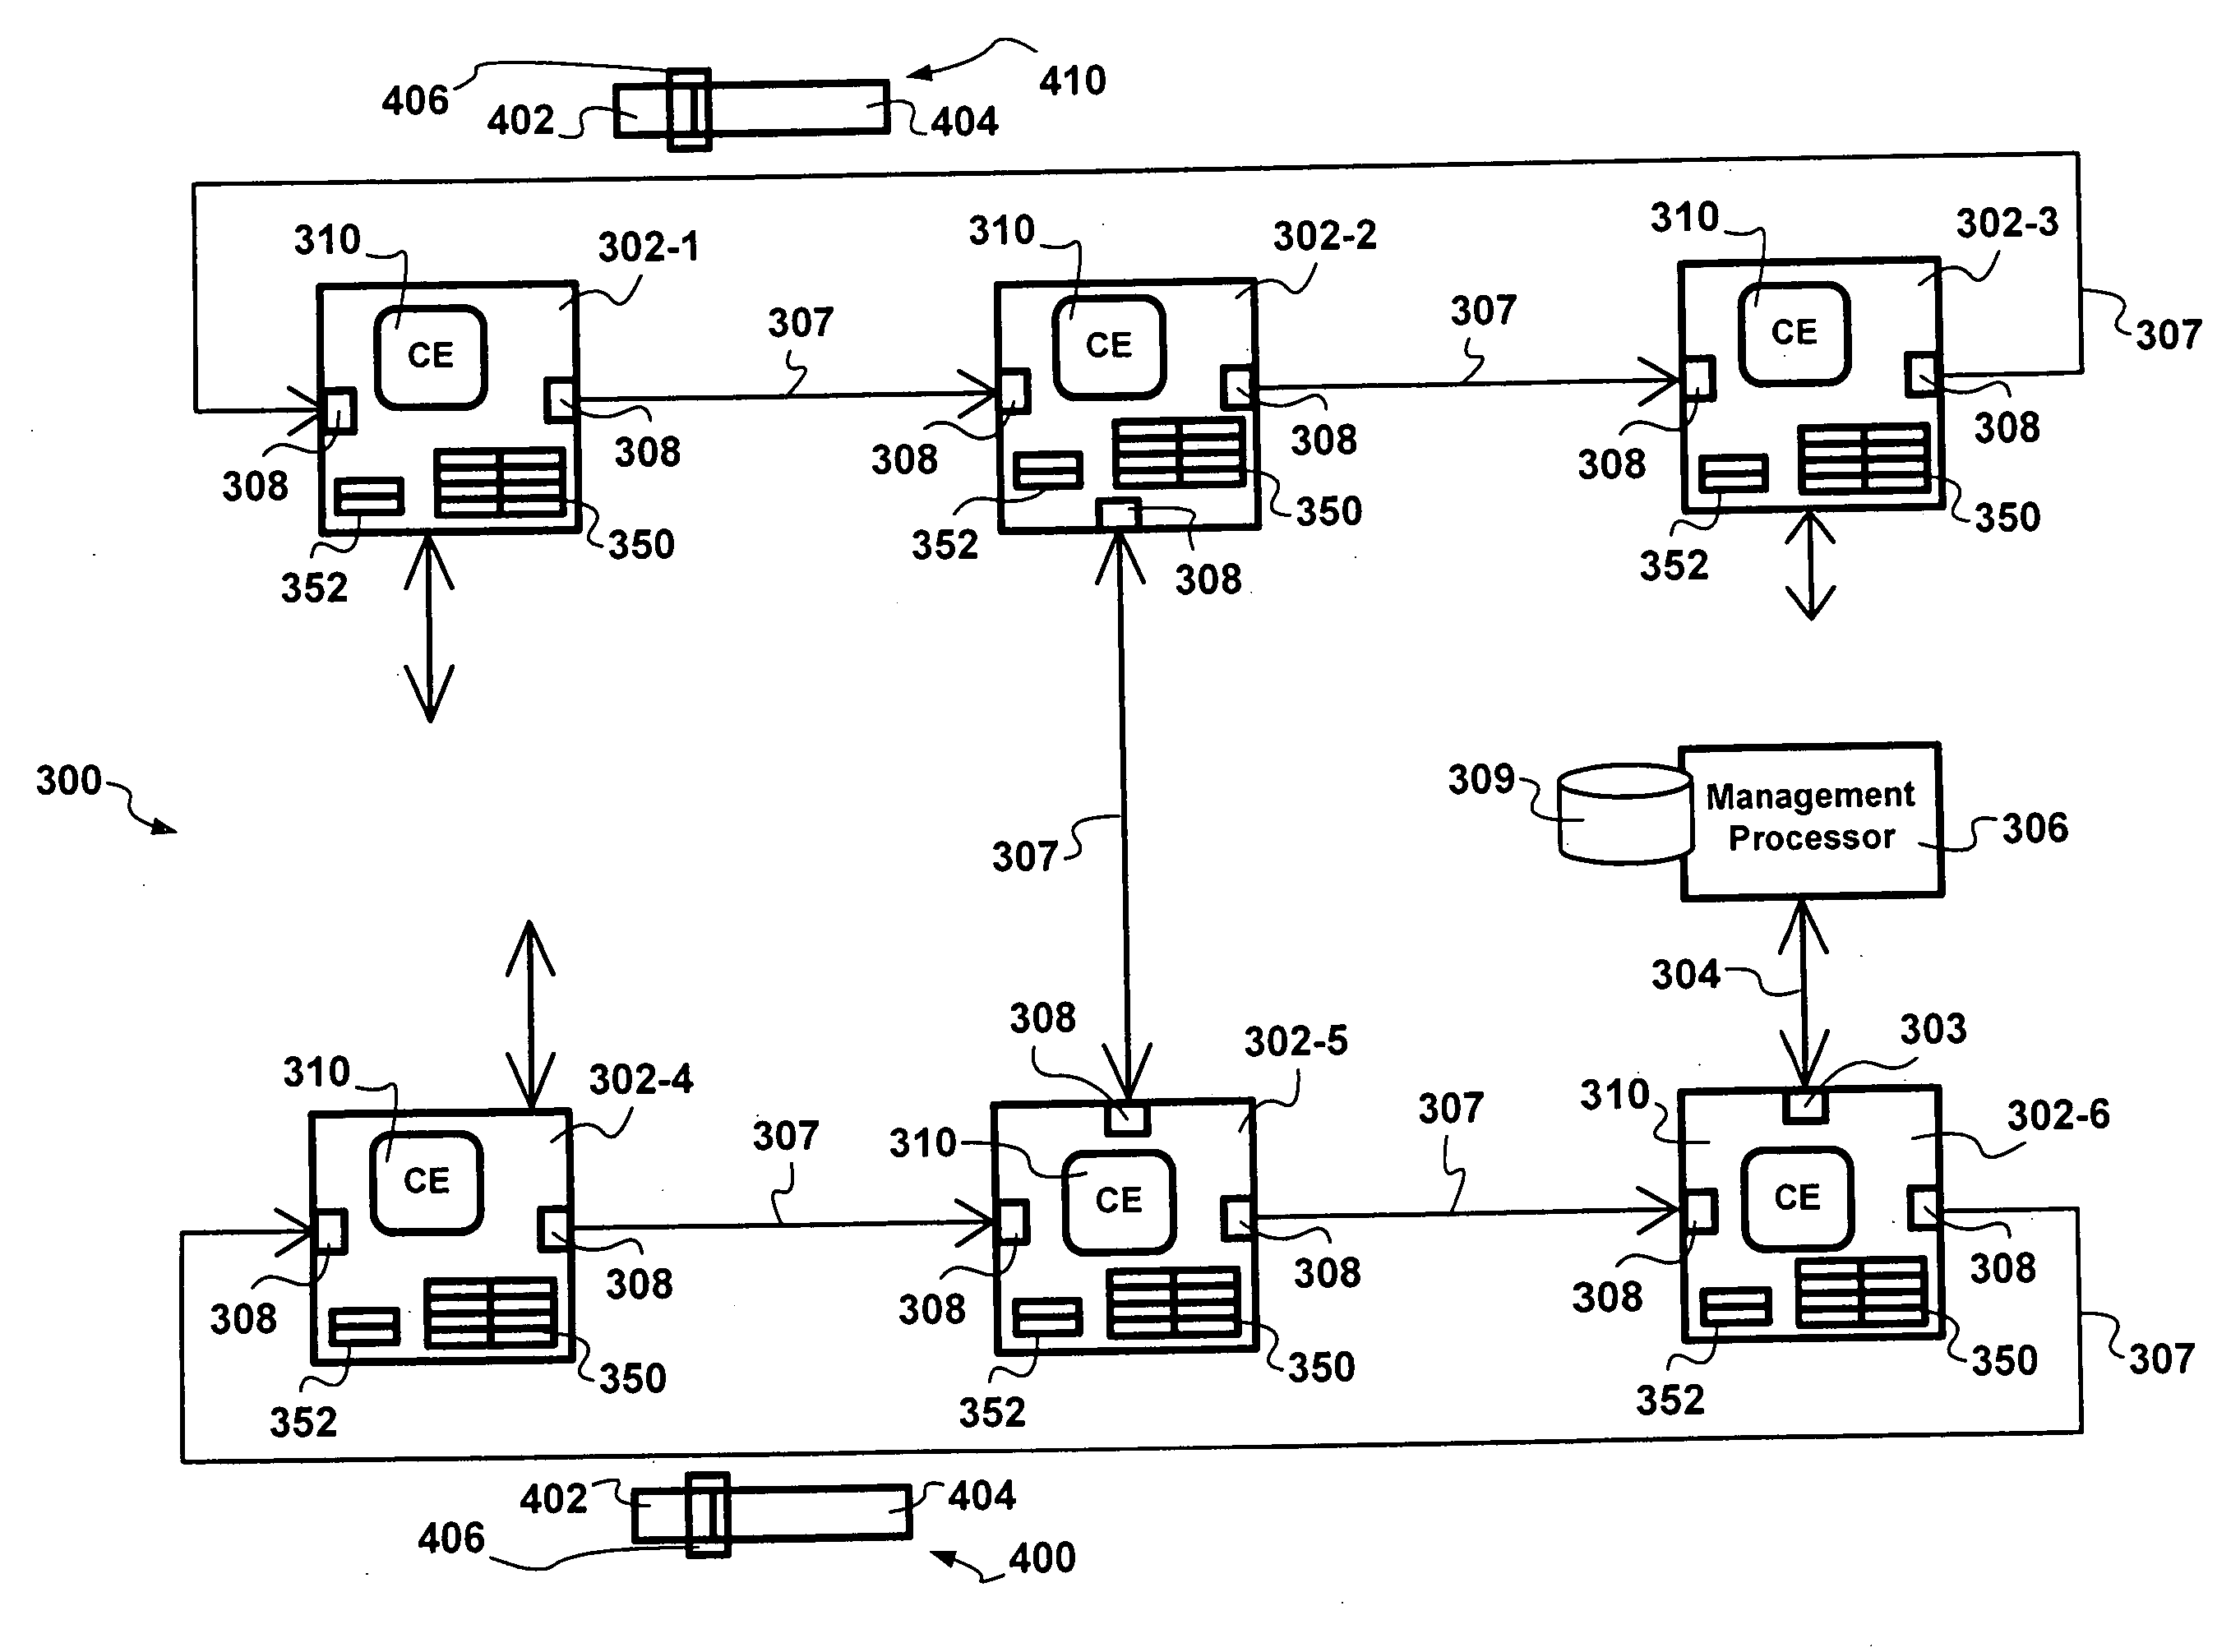 Remote control of a switching node in a stack of switching nodes